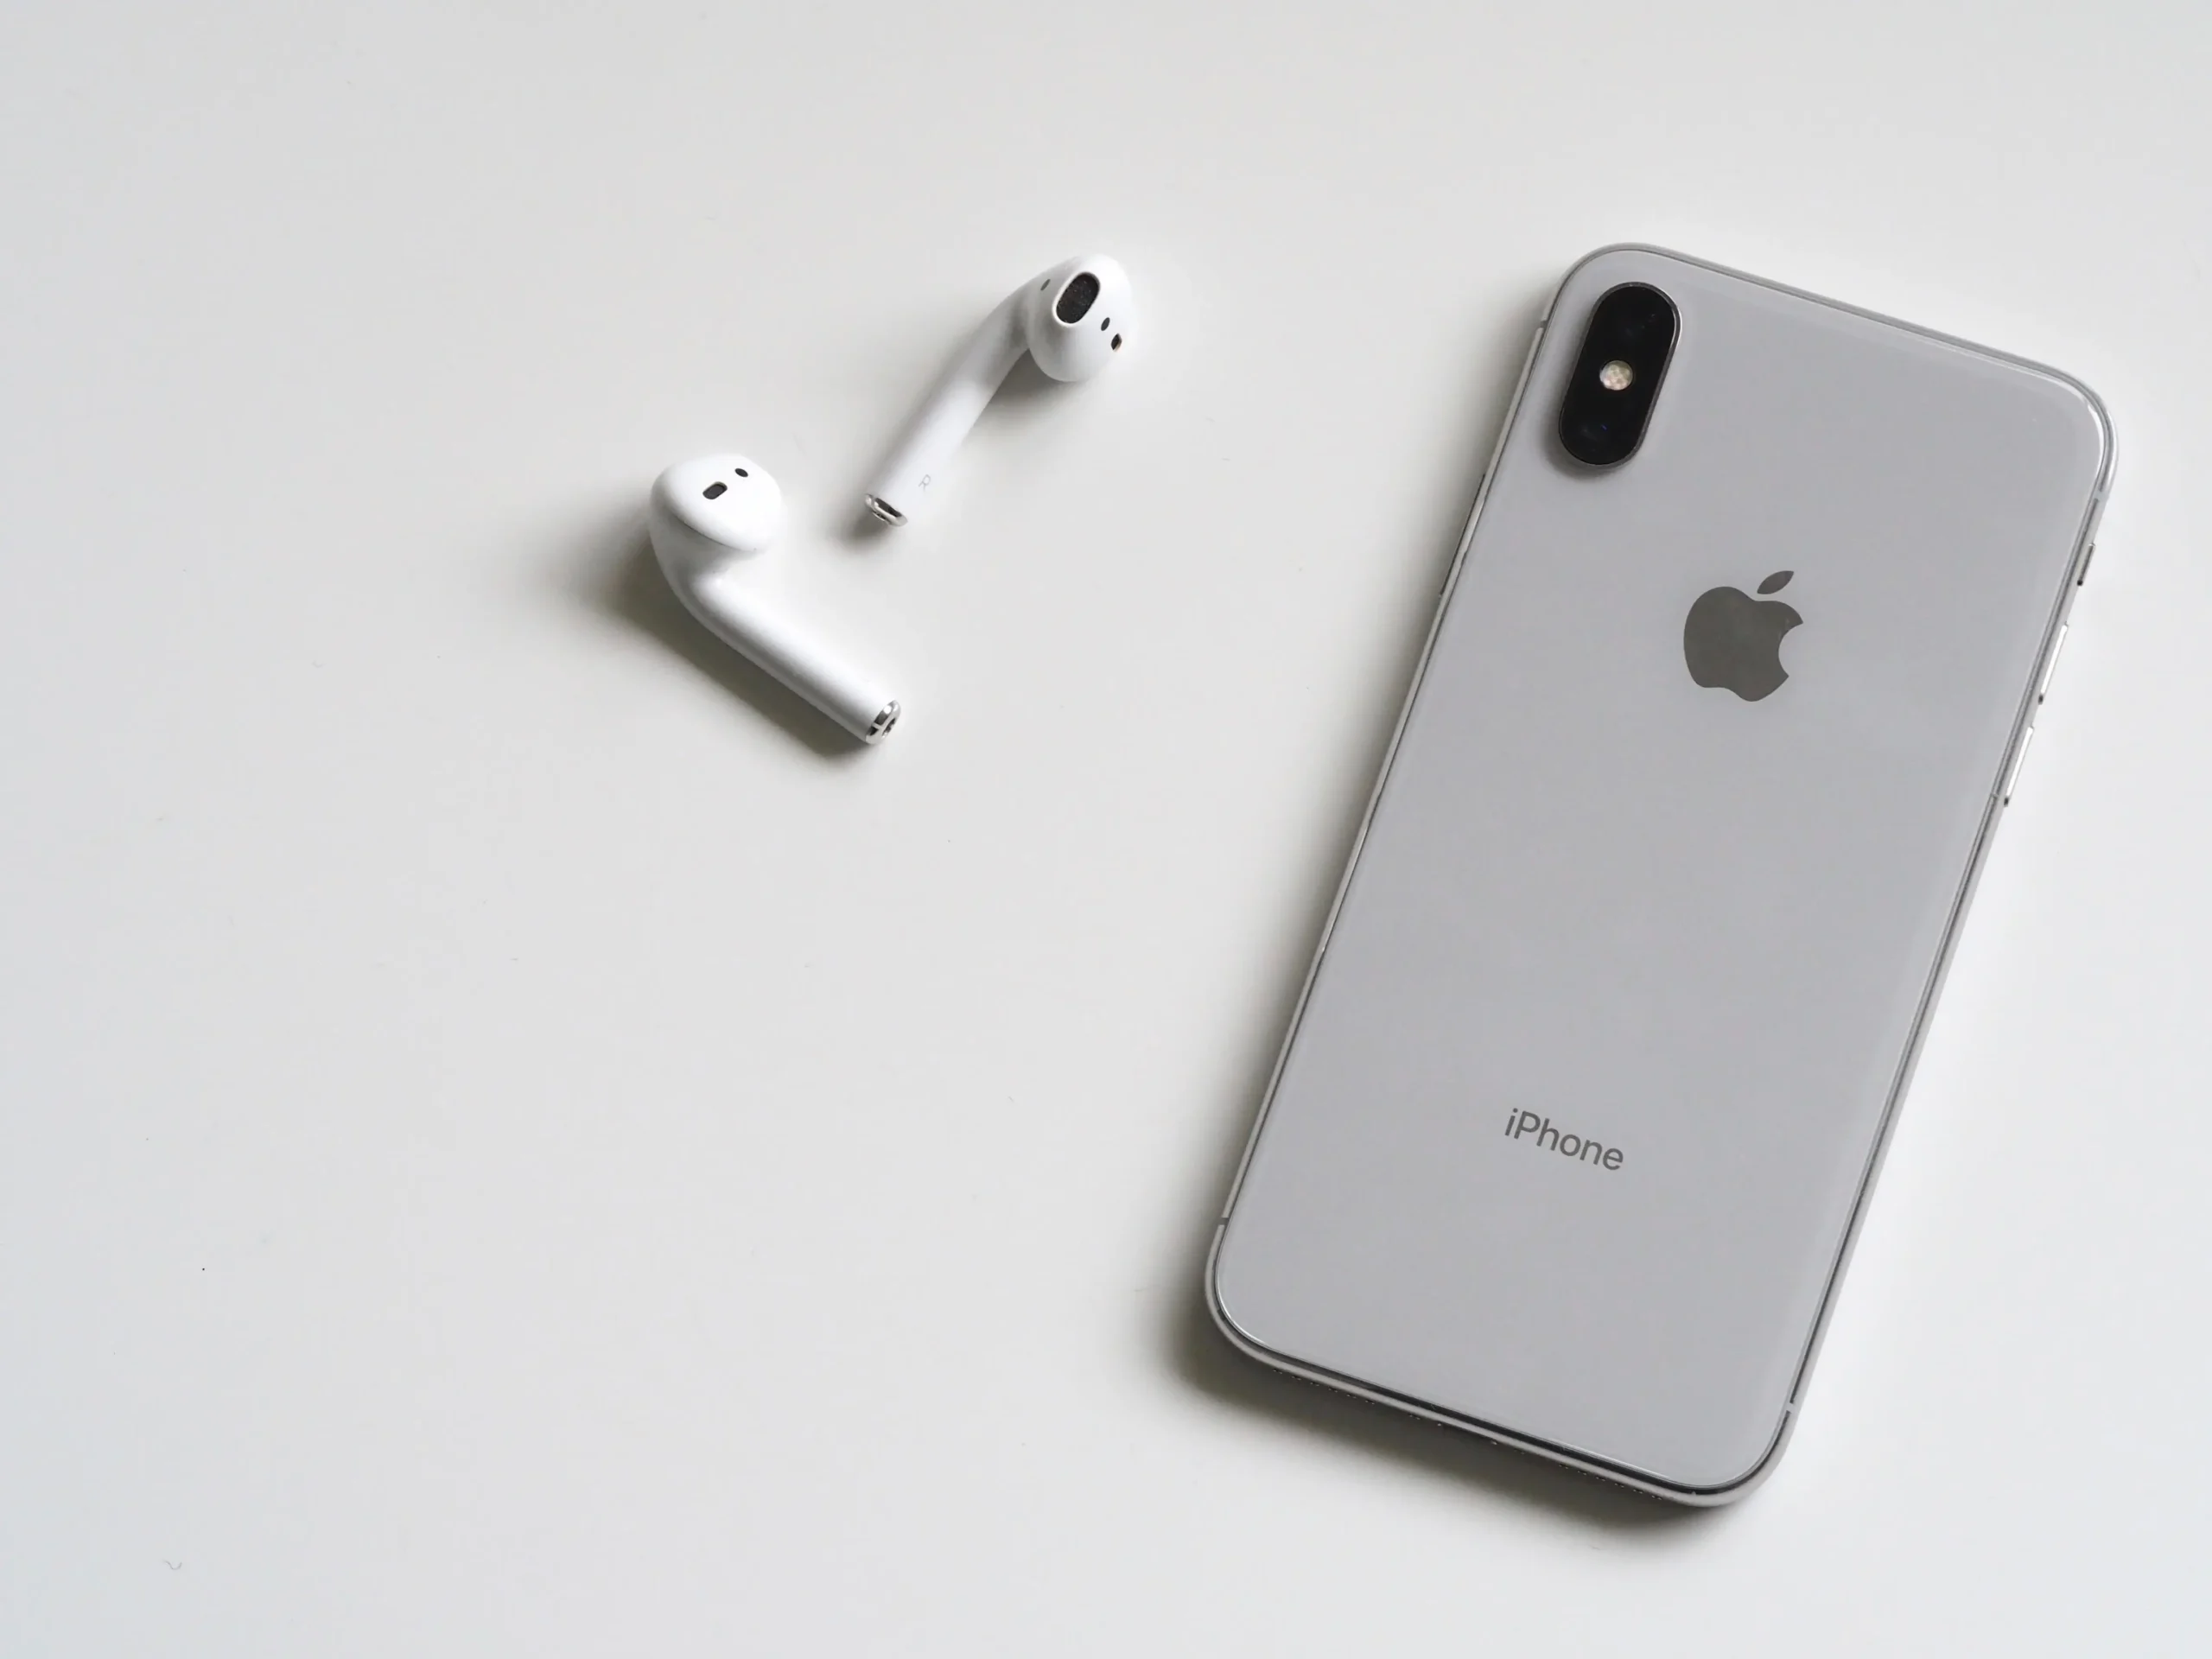 Apple AirPods Pro: The Next Generation of Wireless Earbuds